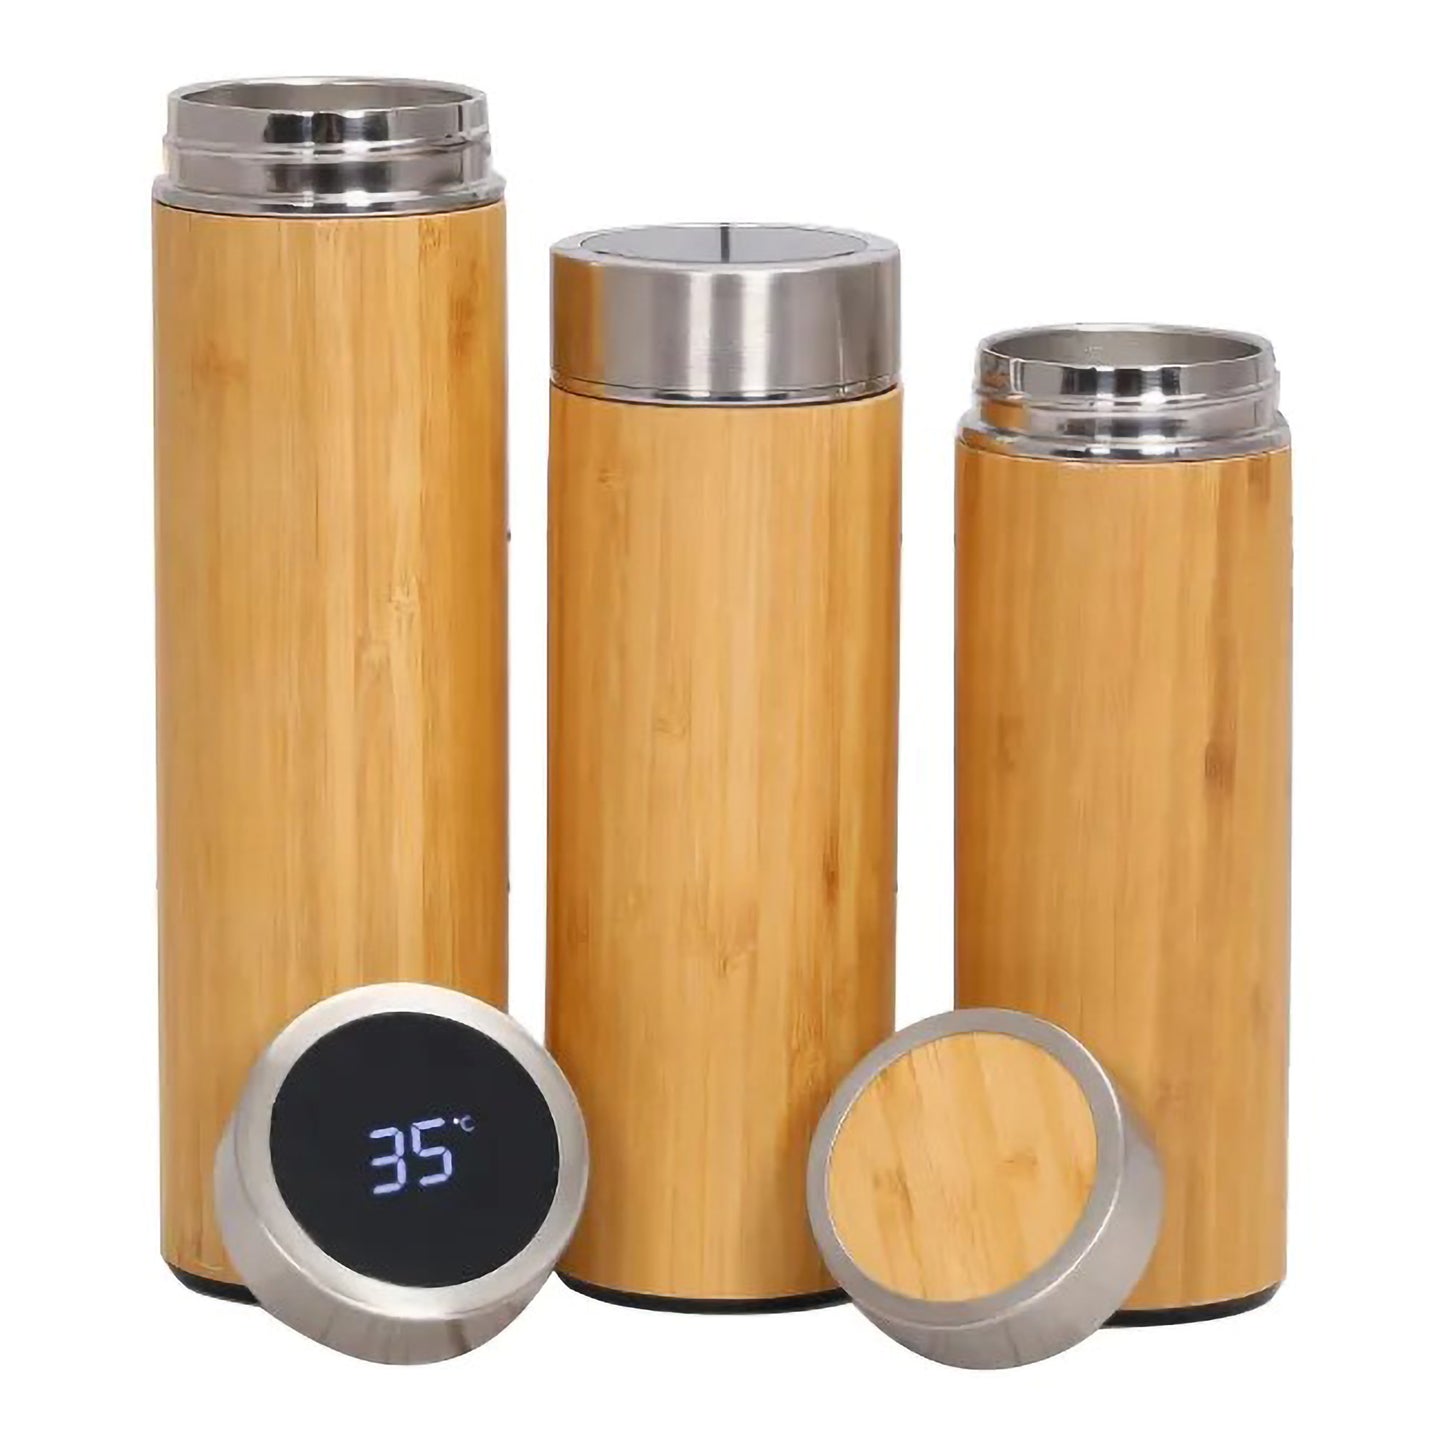 Temperature Display Double Walled Bamboo Insulated Smart Thermos Water Bottle Vacuum Flask